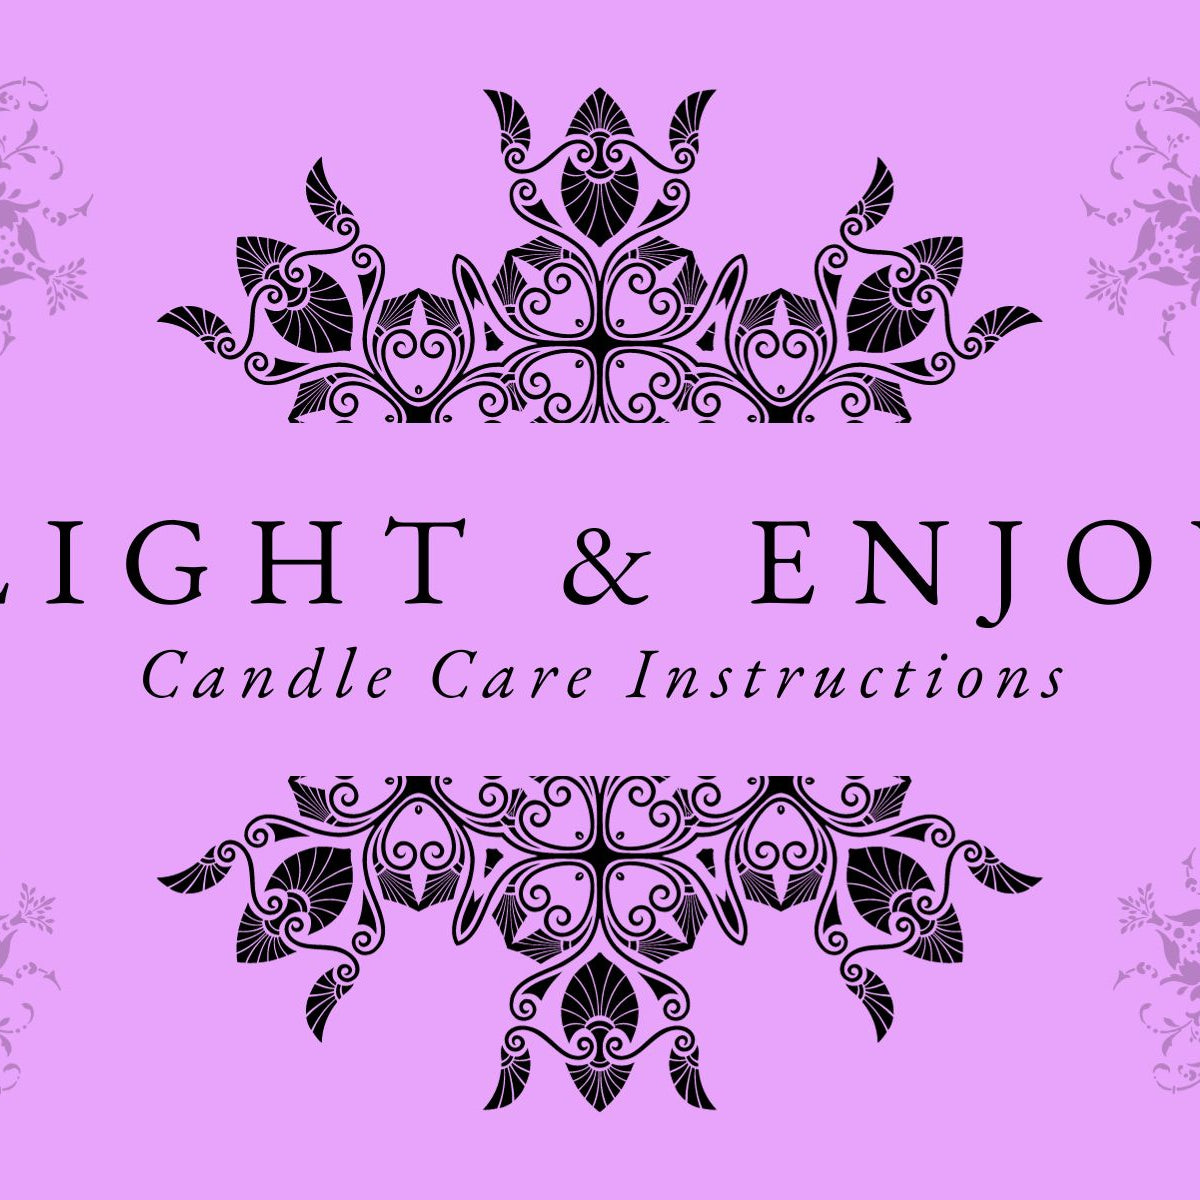 Printed Ornate Lavender Candle Care Cards | 50